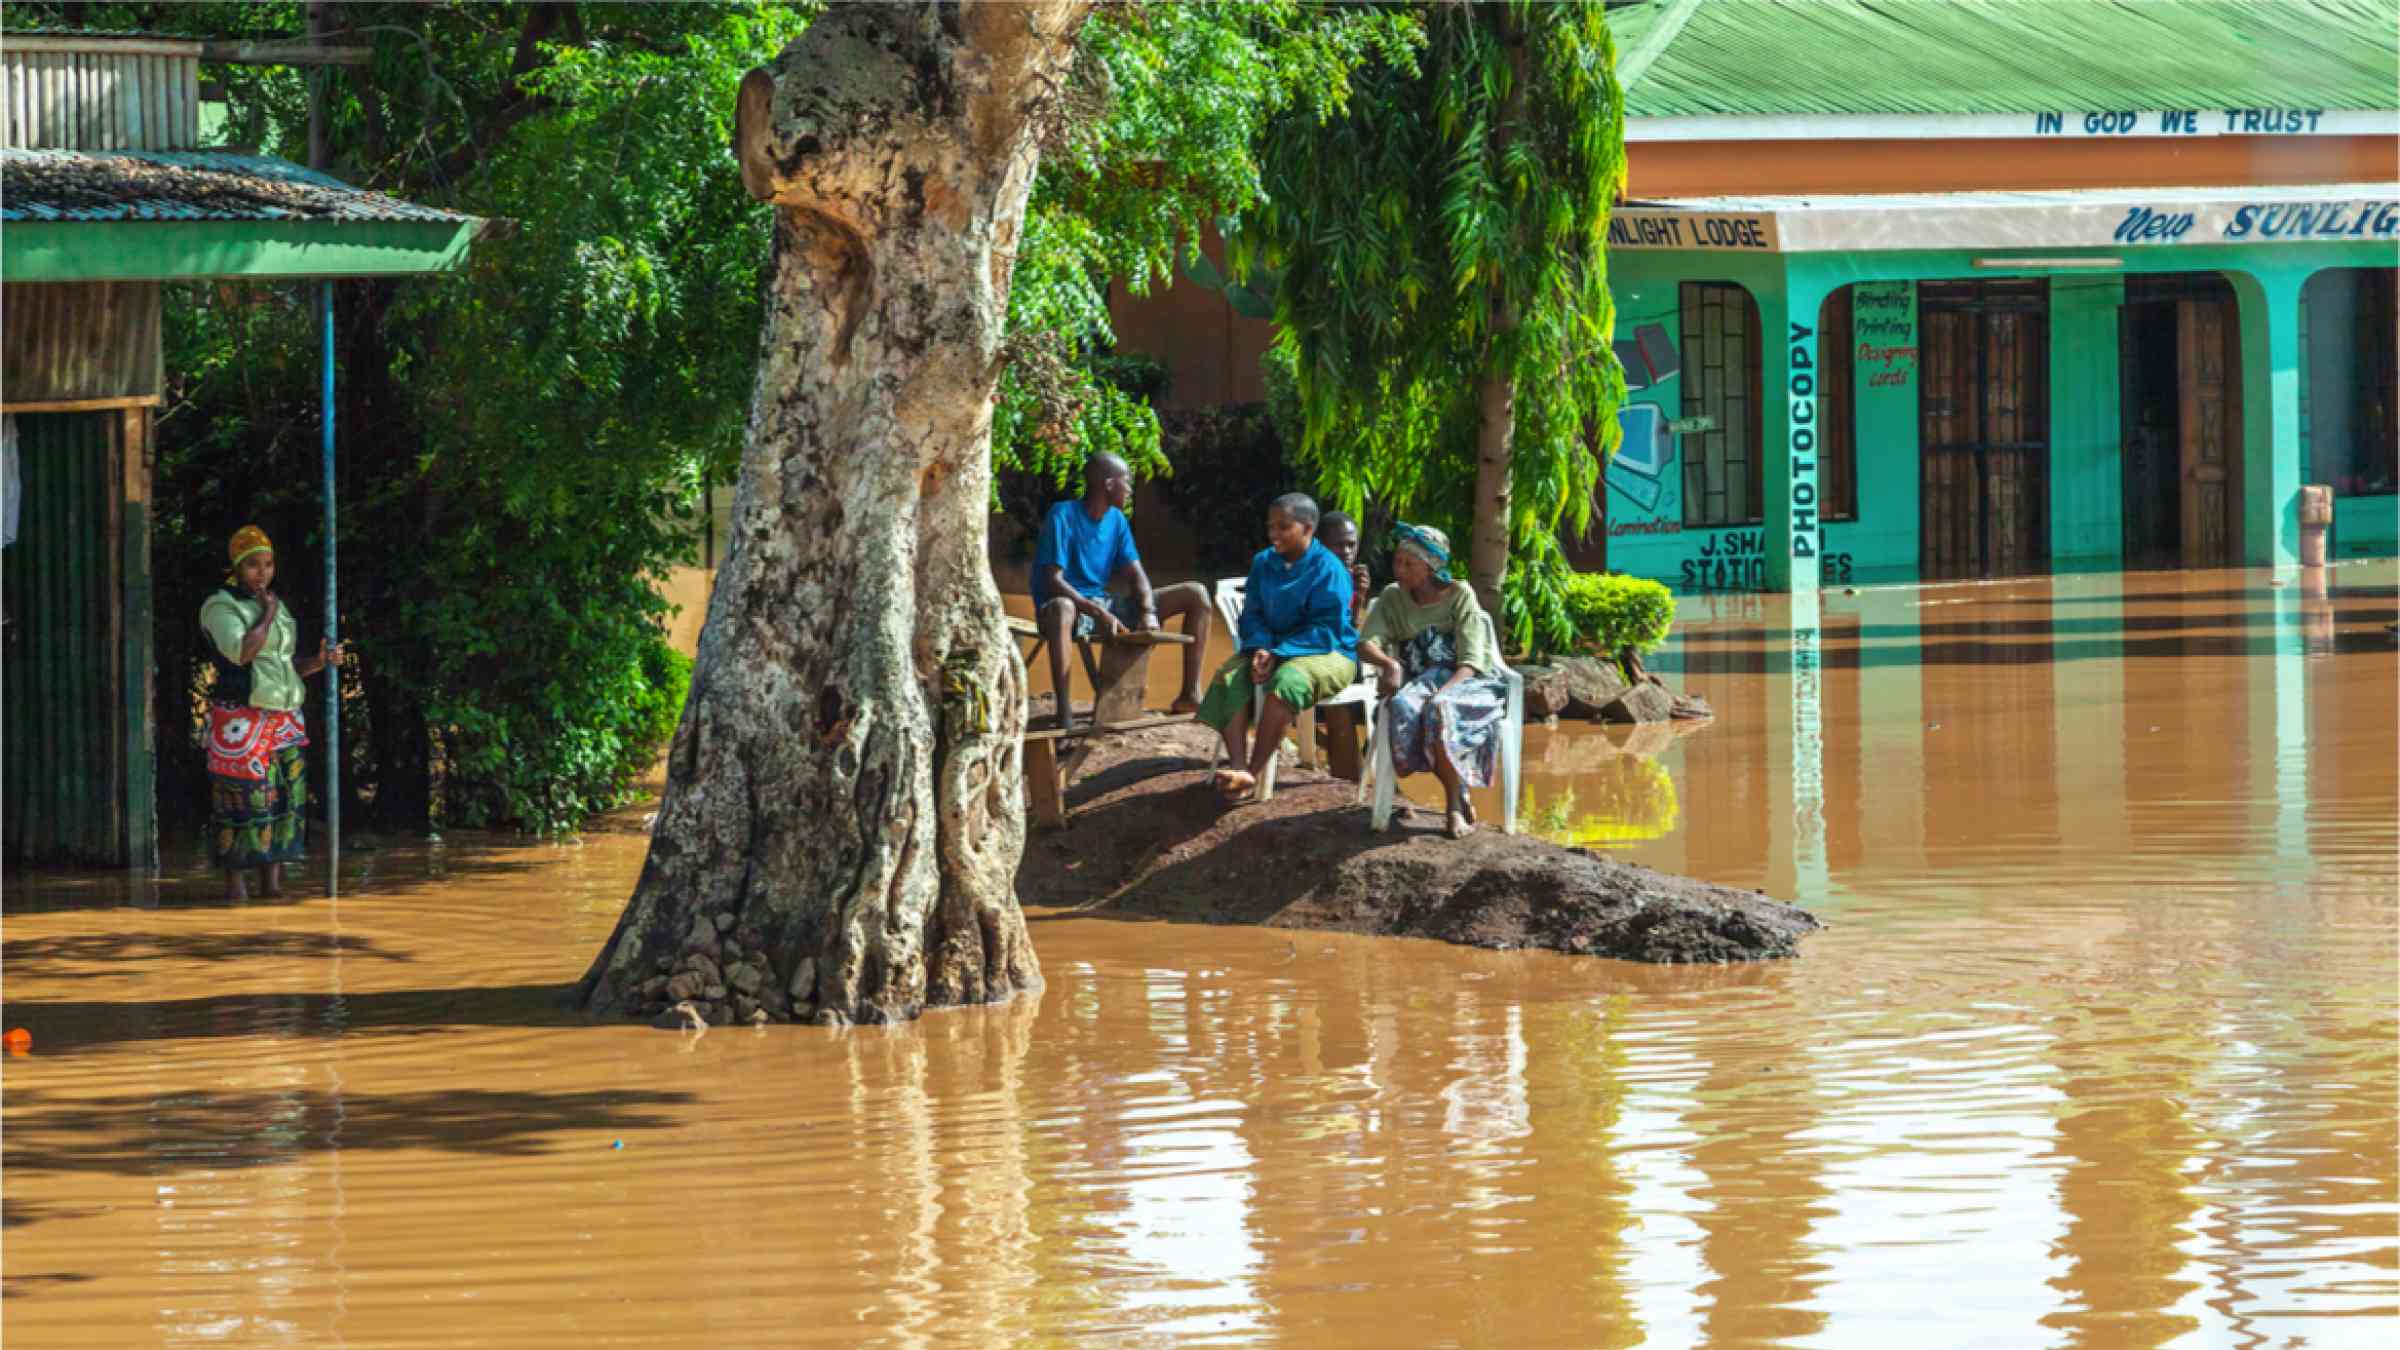 Floods in Tanzania have previously destabilized vital economic functions of the city. www.theexchange.africa